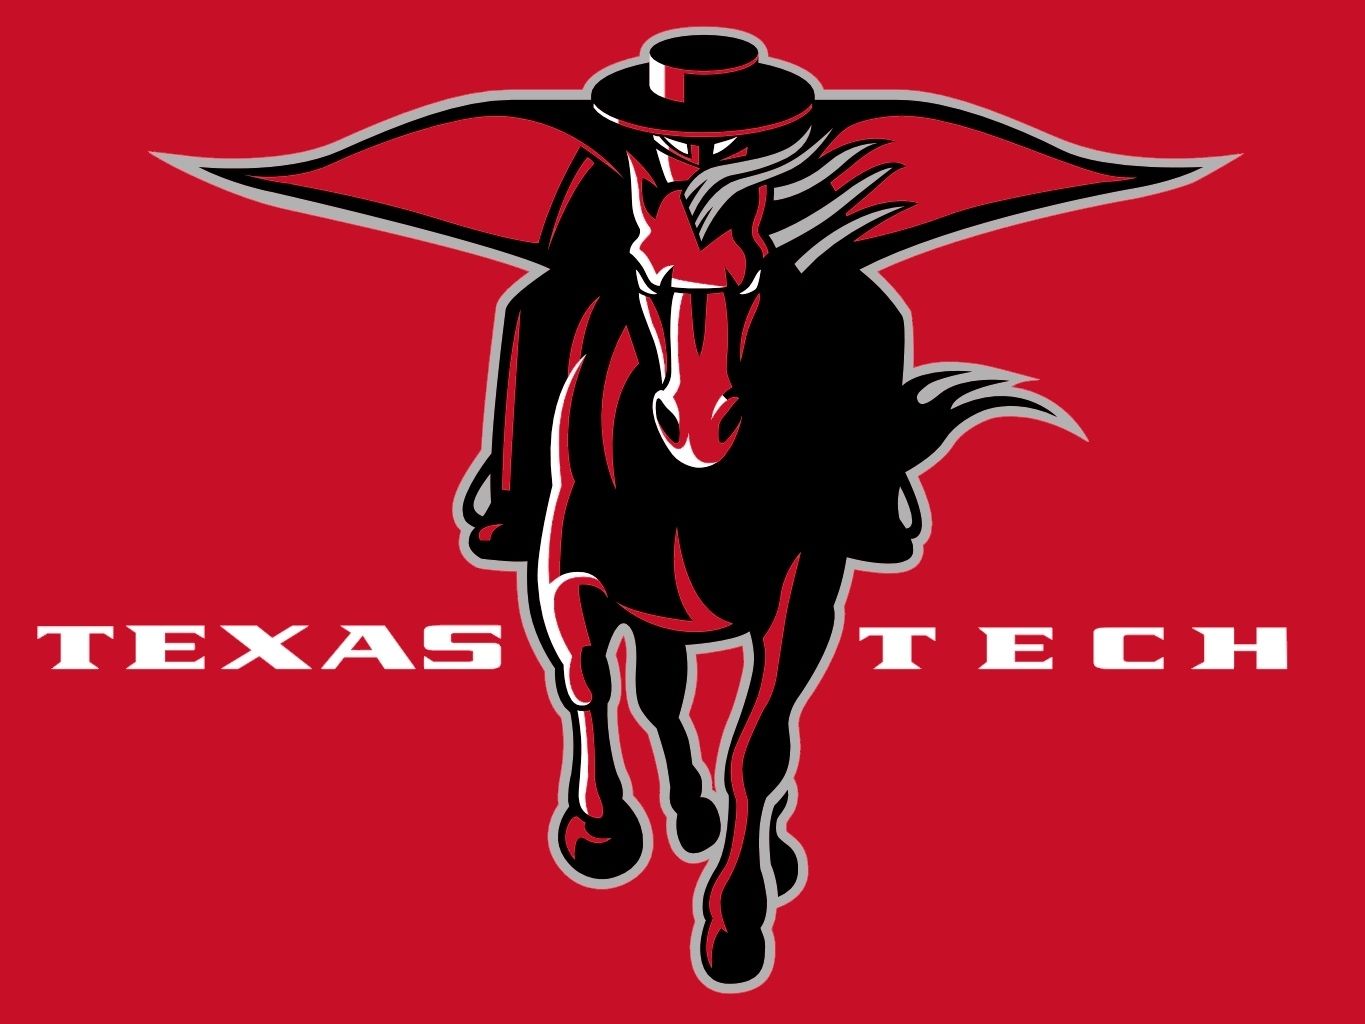 Images: Texas Tech Red Raider Picture. Texas tech, Texas tech red raiders, Texas tech logo